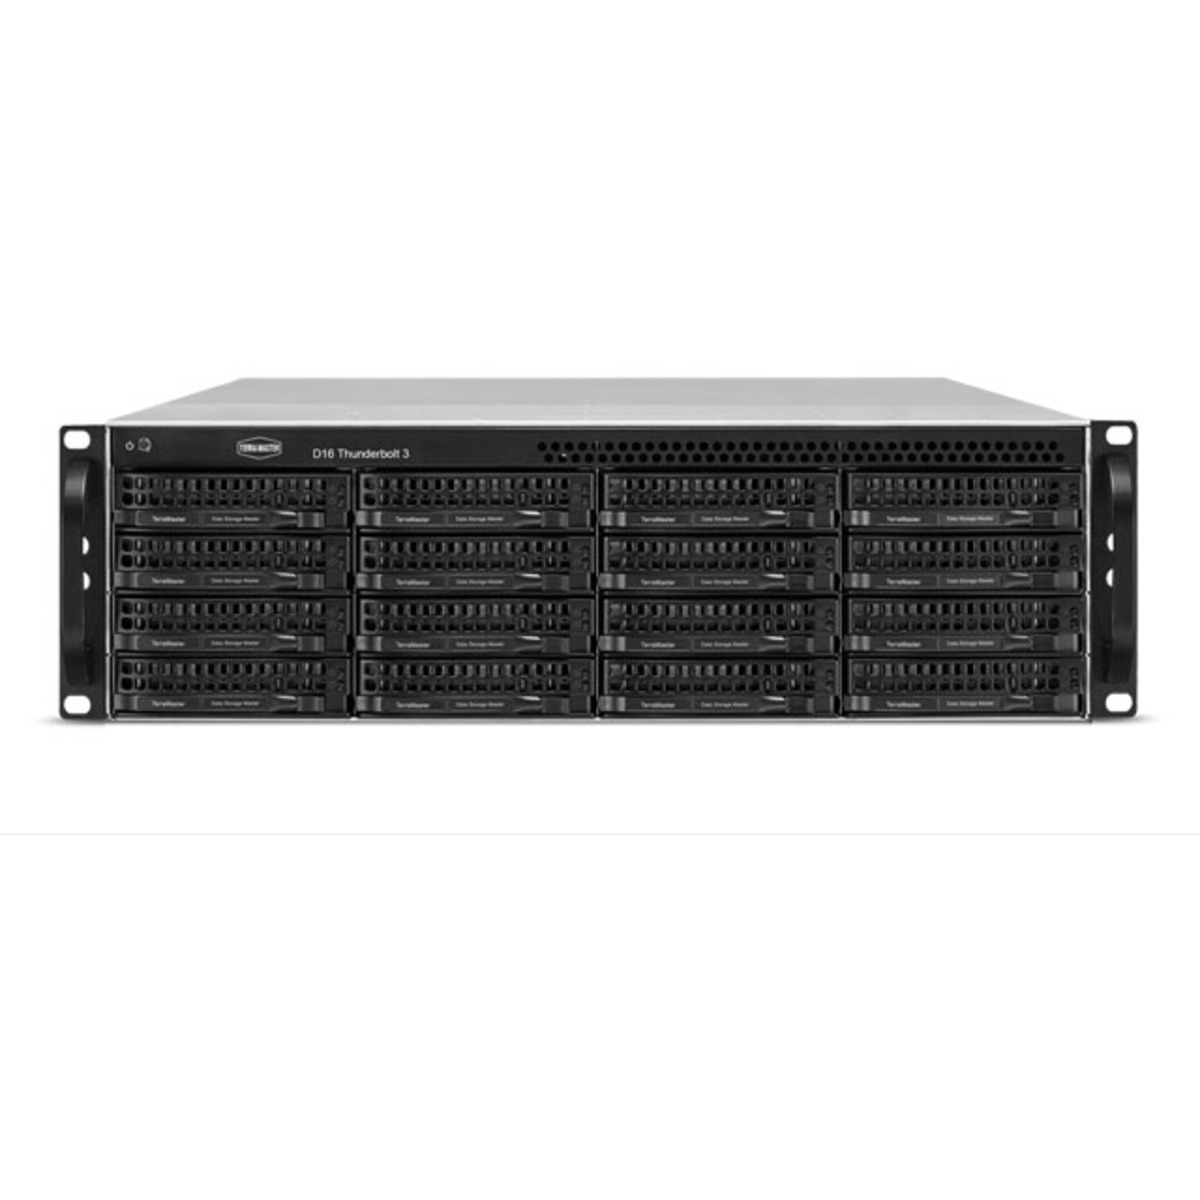 TerraMaster D16 Thunderbolt 3 22tb 16-Bay RackMount Multimedia / Power User / Business DAS - Direct Attached Storage Device 11x2tb Western Digital Red Pro WD2002FFSX 3.5 7200rpm SATA 6Gb/s HDD NAS Class Drives Installed - Burn-In Tested D16 Thunderbolt 3